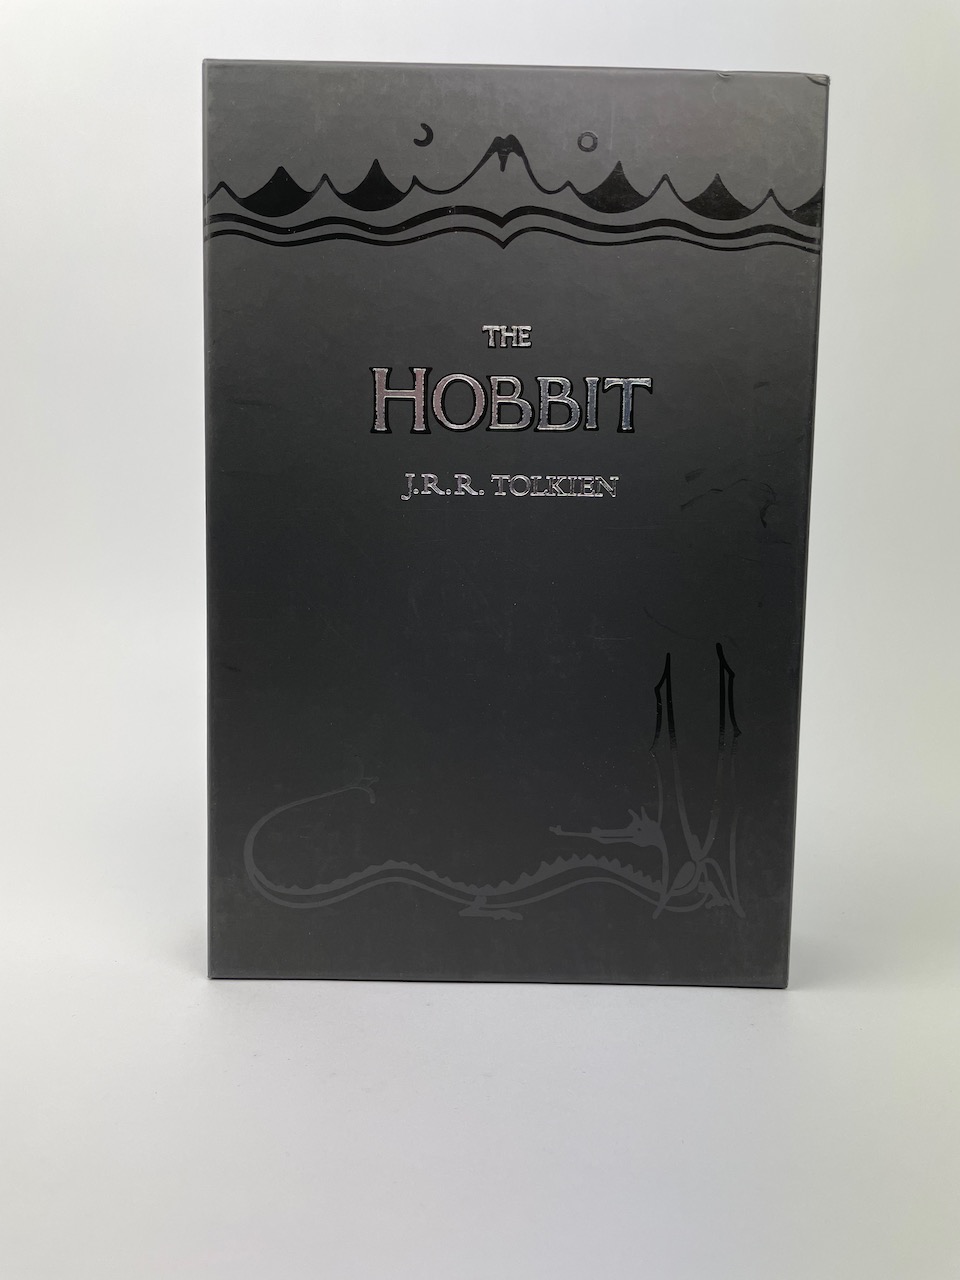 The Boxed set contains a copy of the Hobbit, as well as 8 postcards depicting the maps, color illustrations and the dustjacket from the book